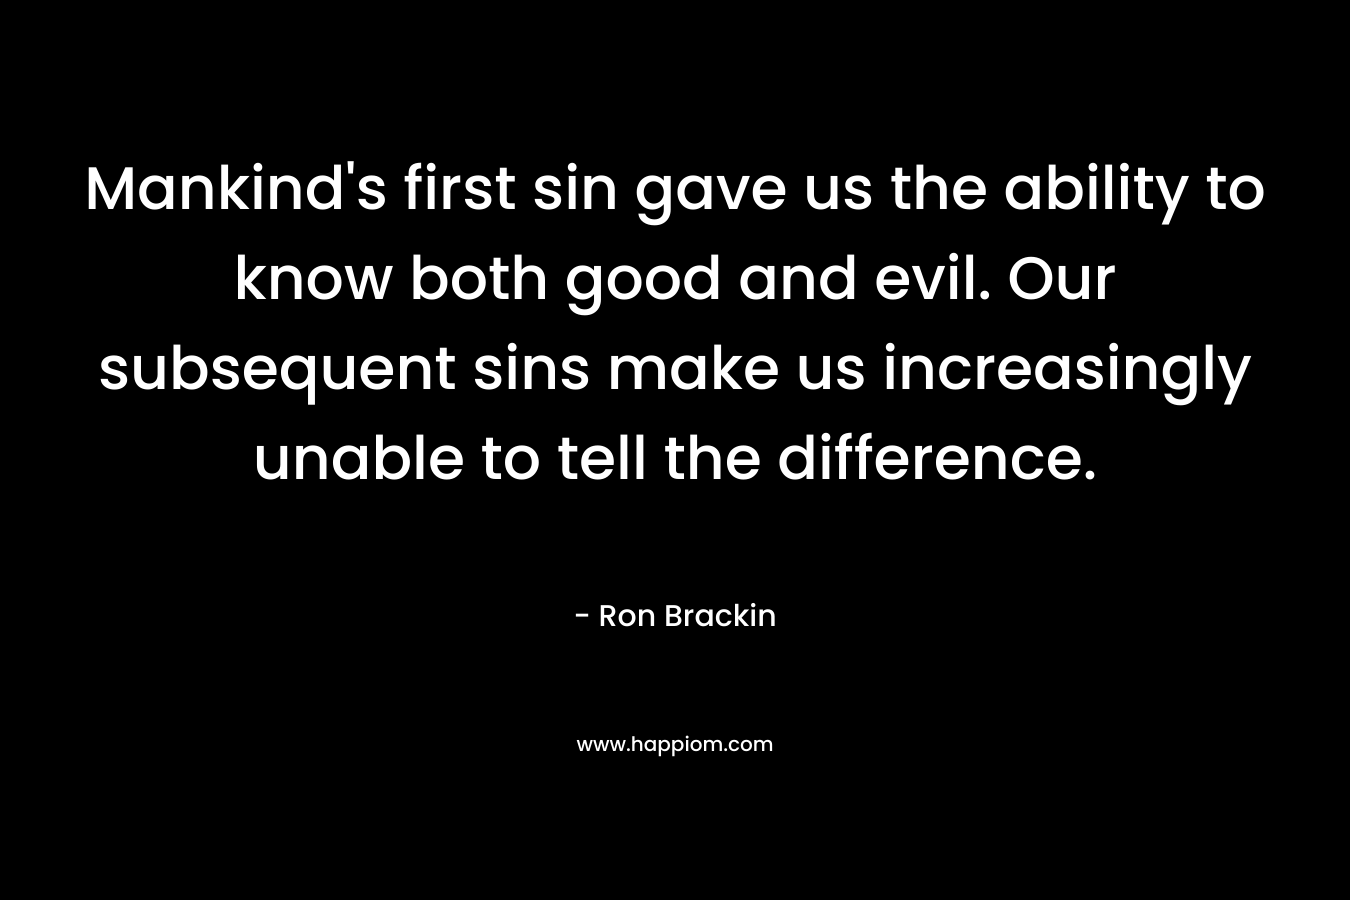 Mankind’s first sin gave us the ability to know both good and evil. Our subsequent sins make us increasingly unable to tell the difference. – Ron Brackin